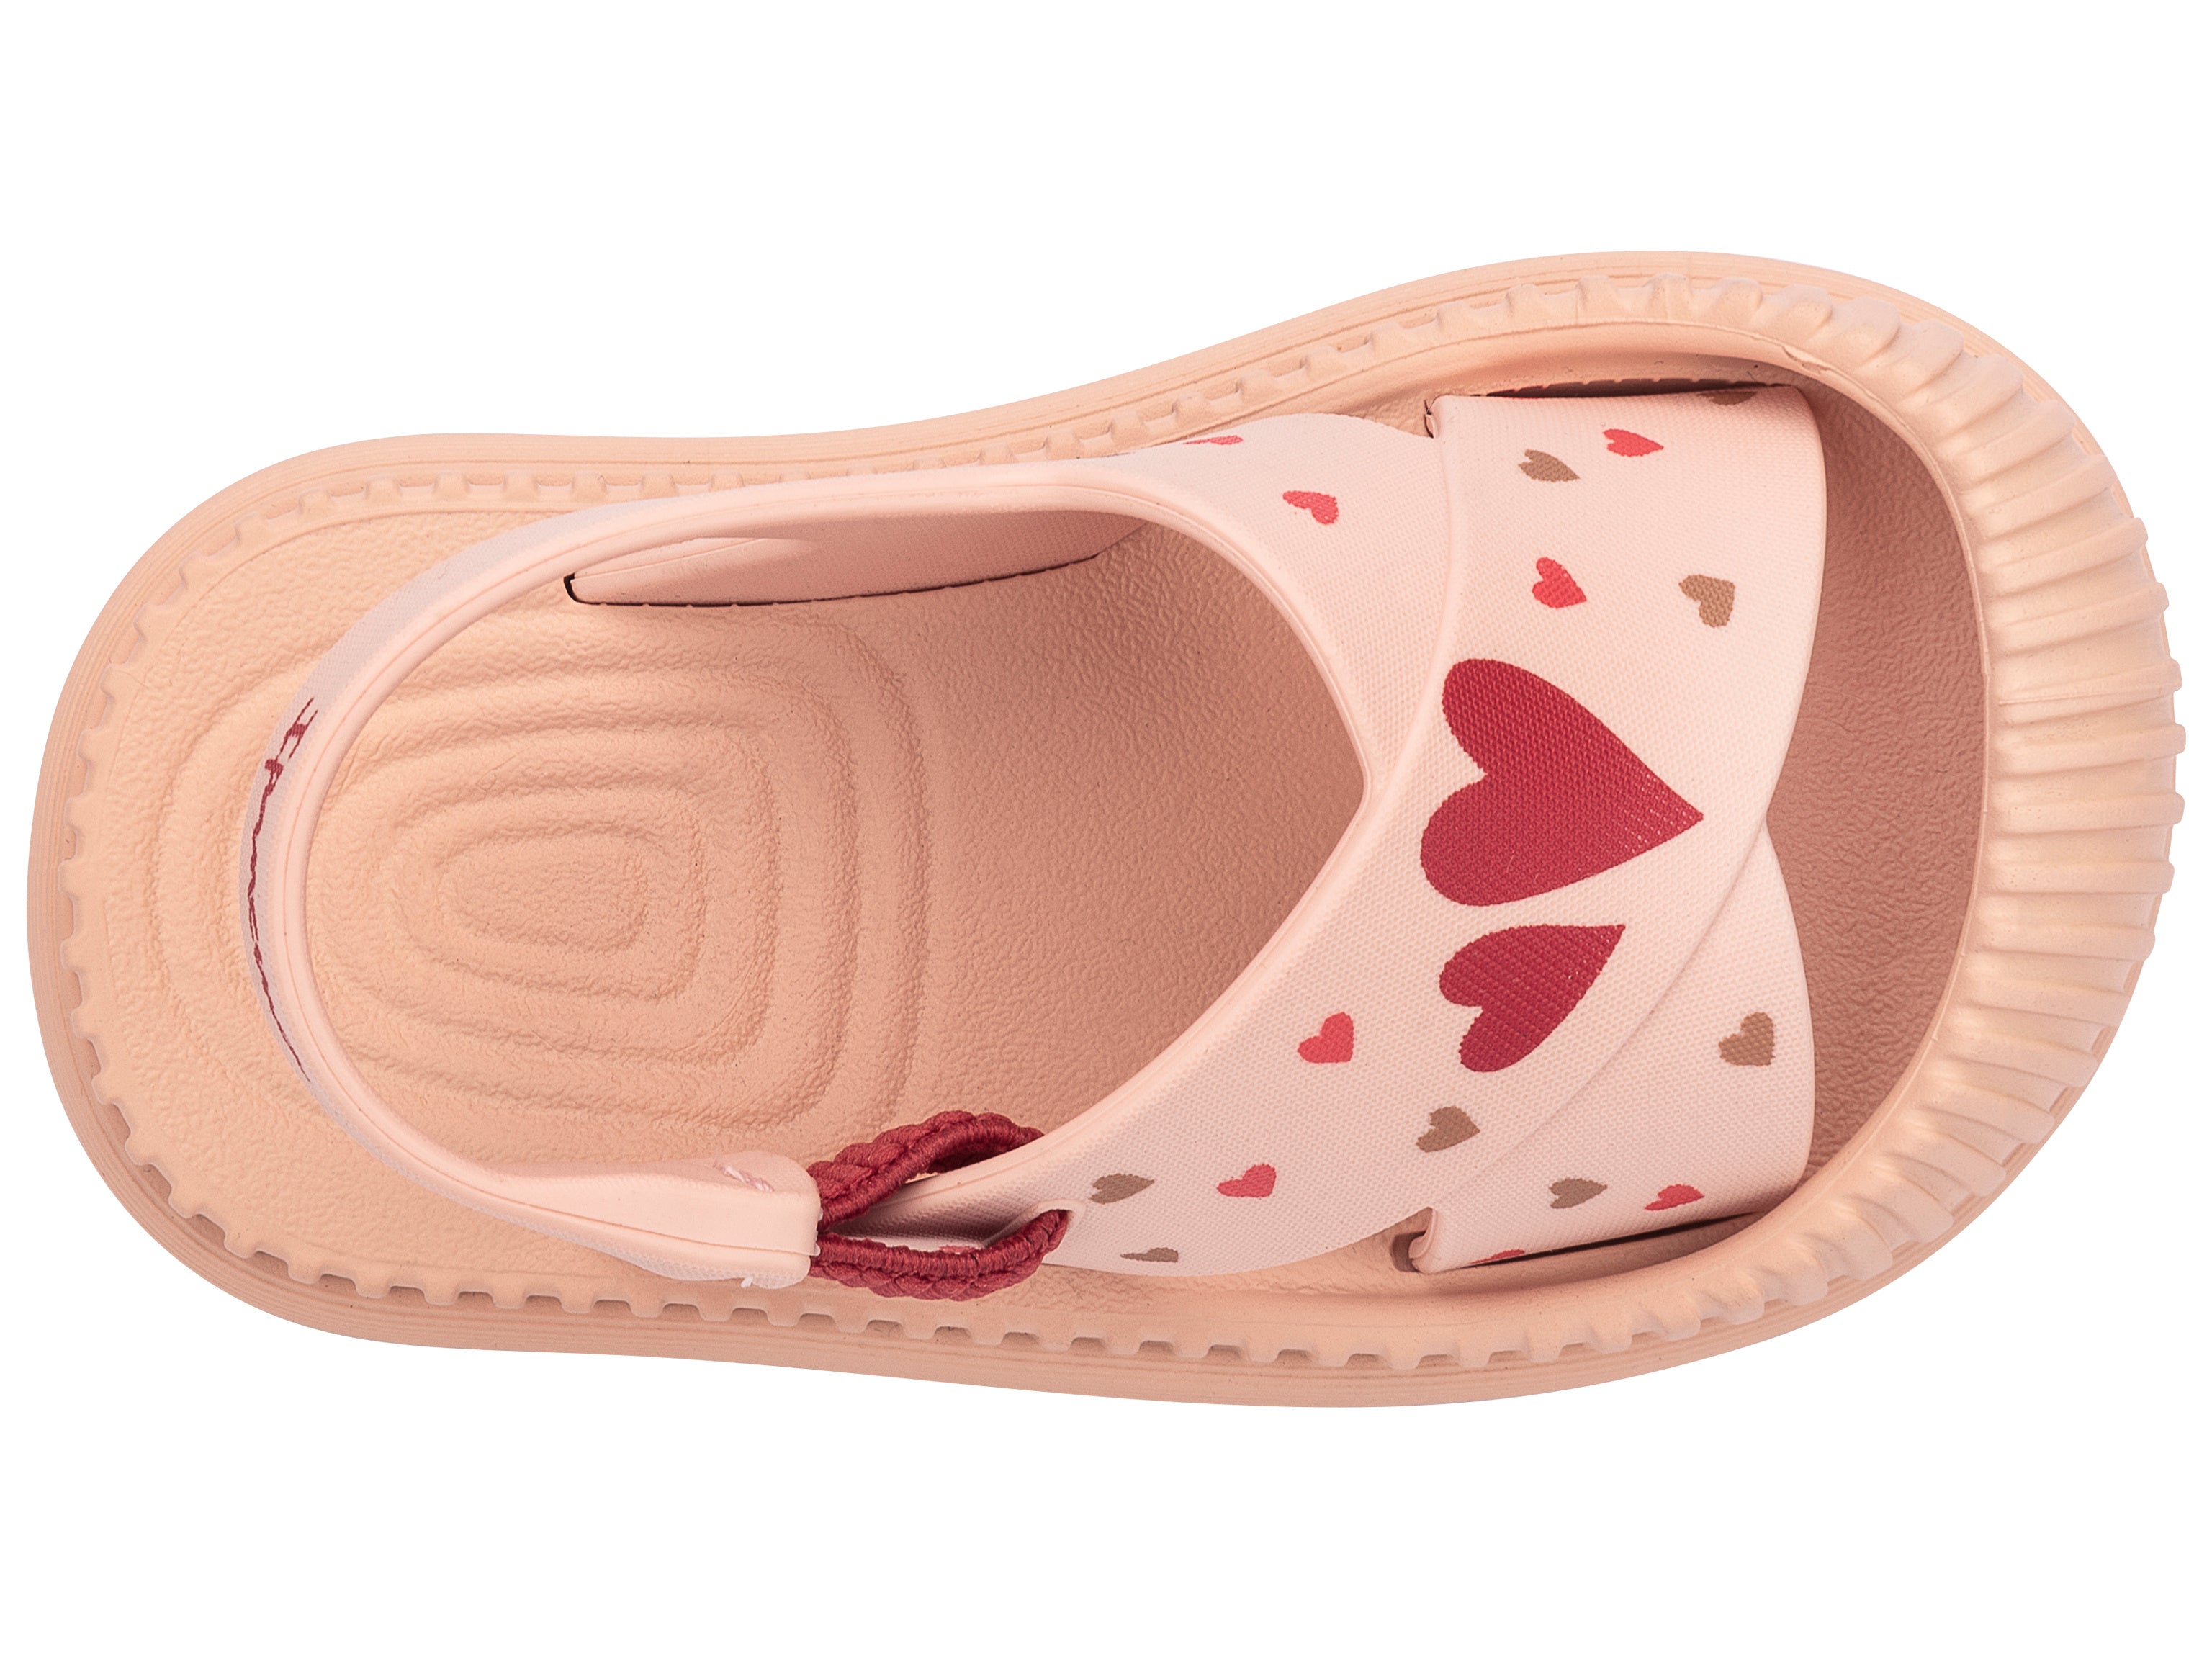 Top view of a beige Ipanema Cute baby sandal with hearts on the strap.